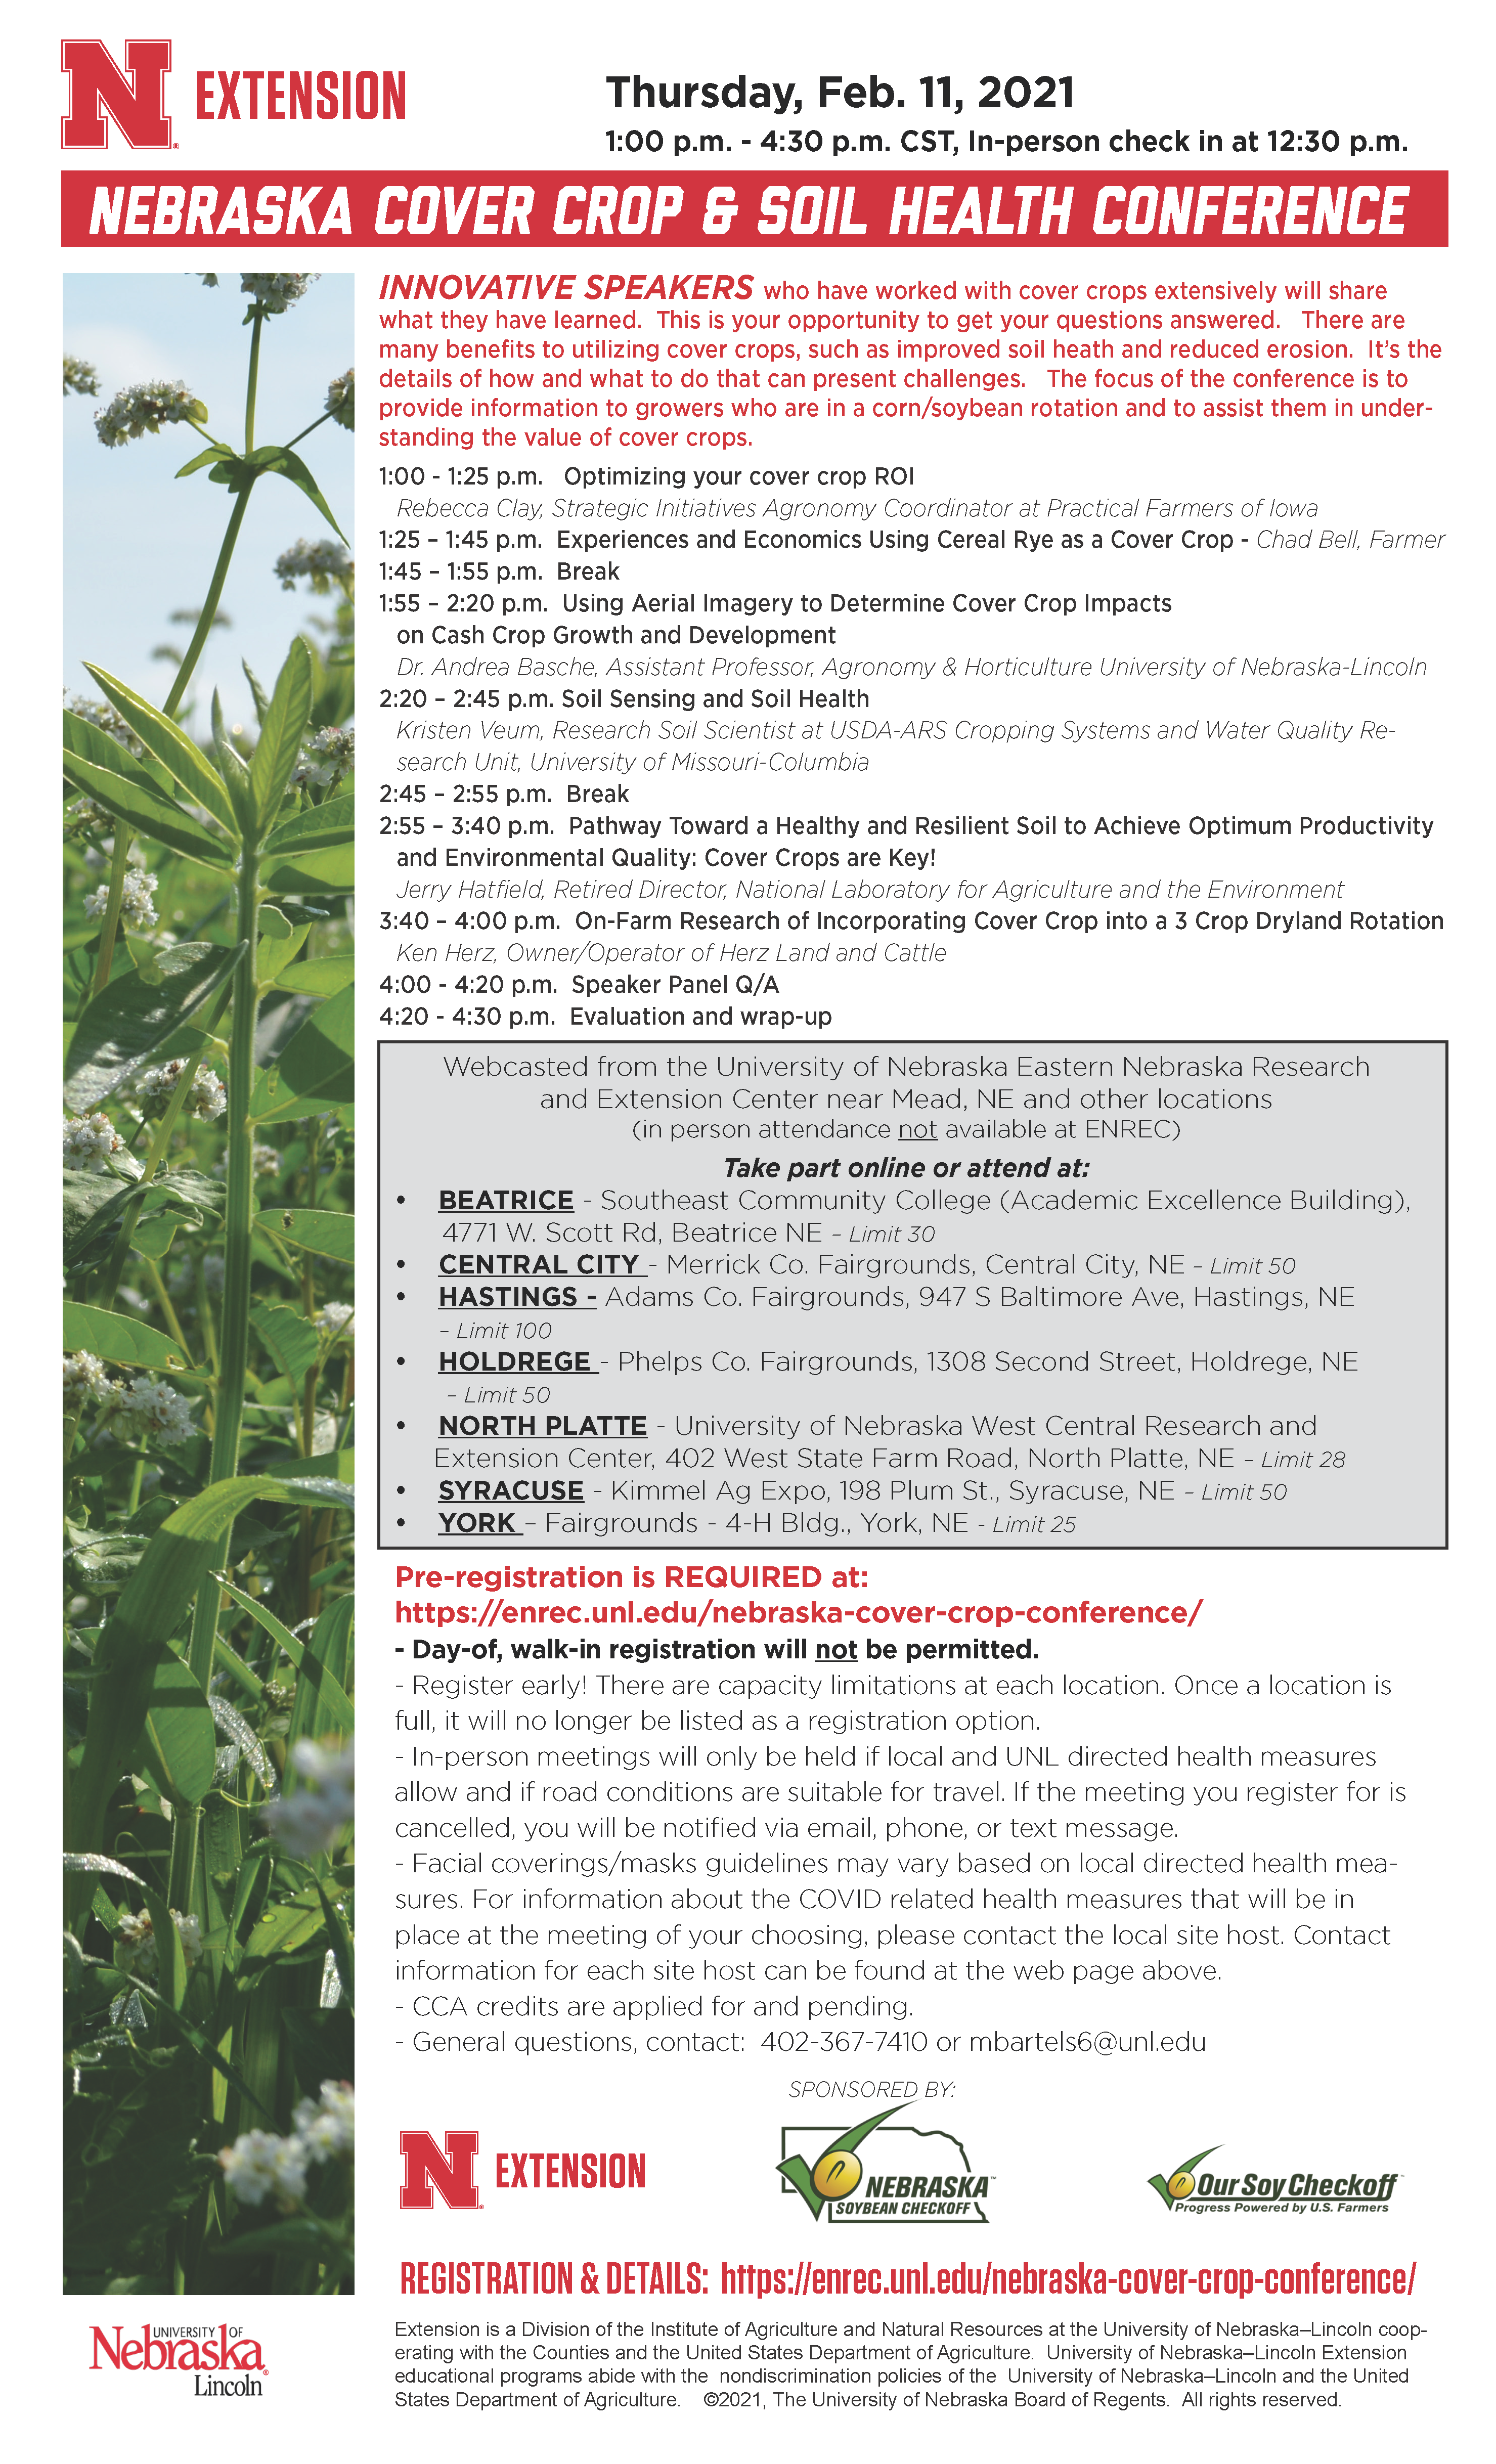 flyer for 2021 Nebraska cover crop and soil health conference